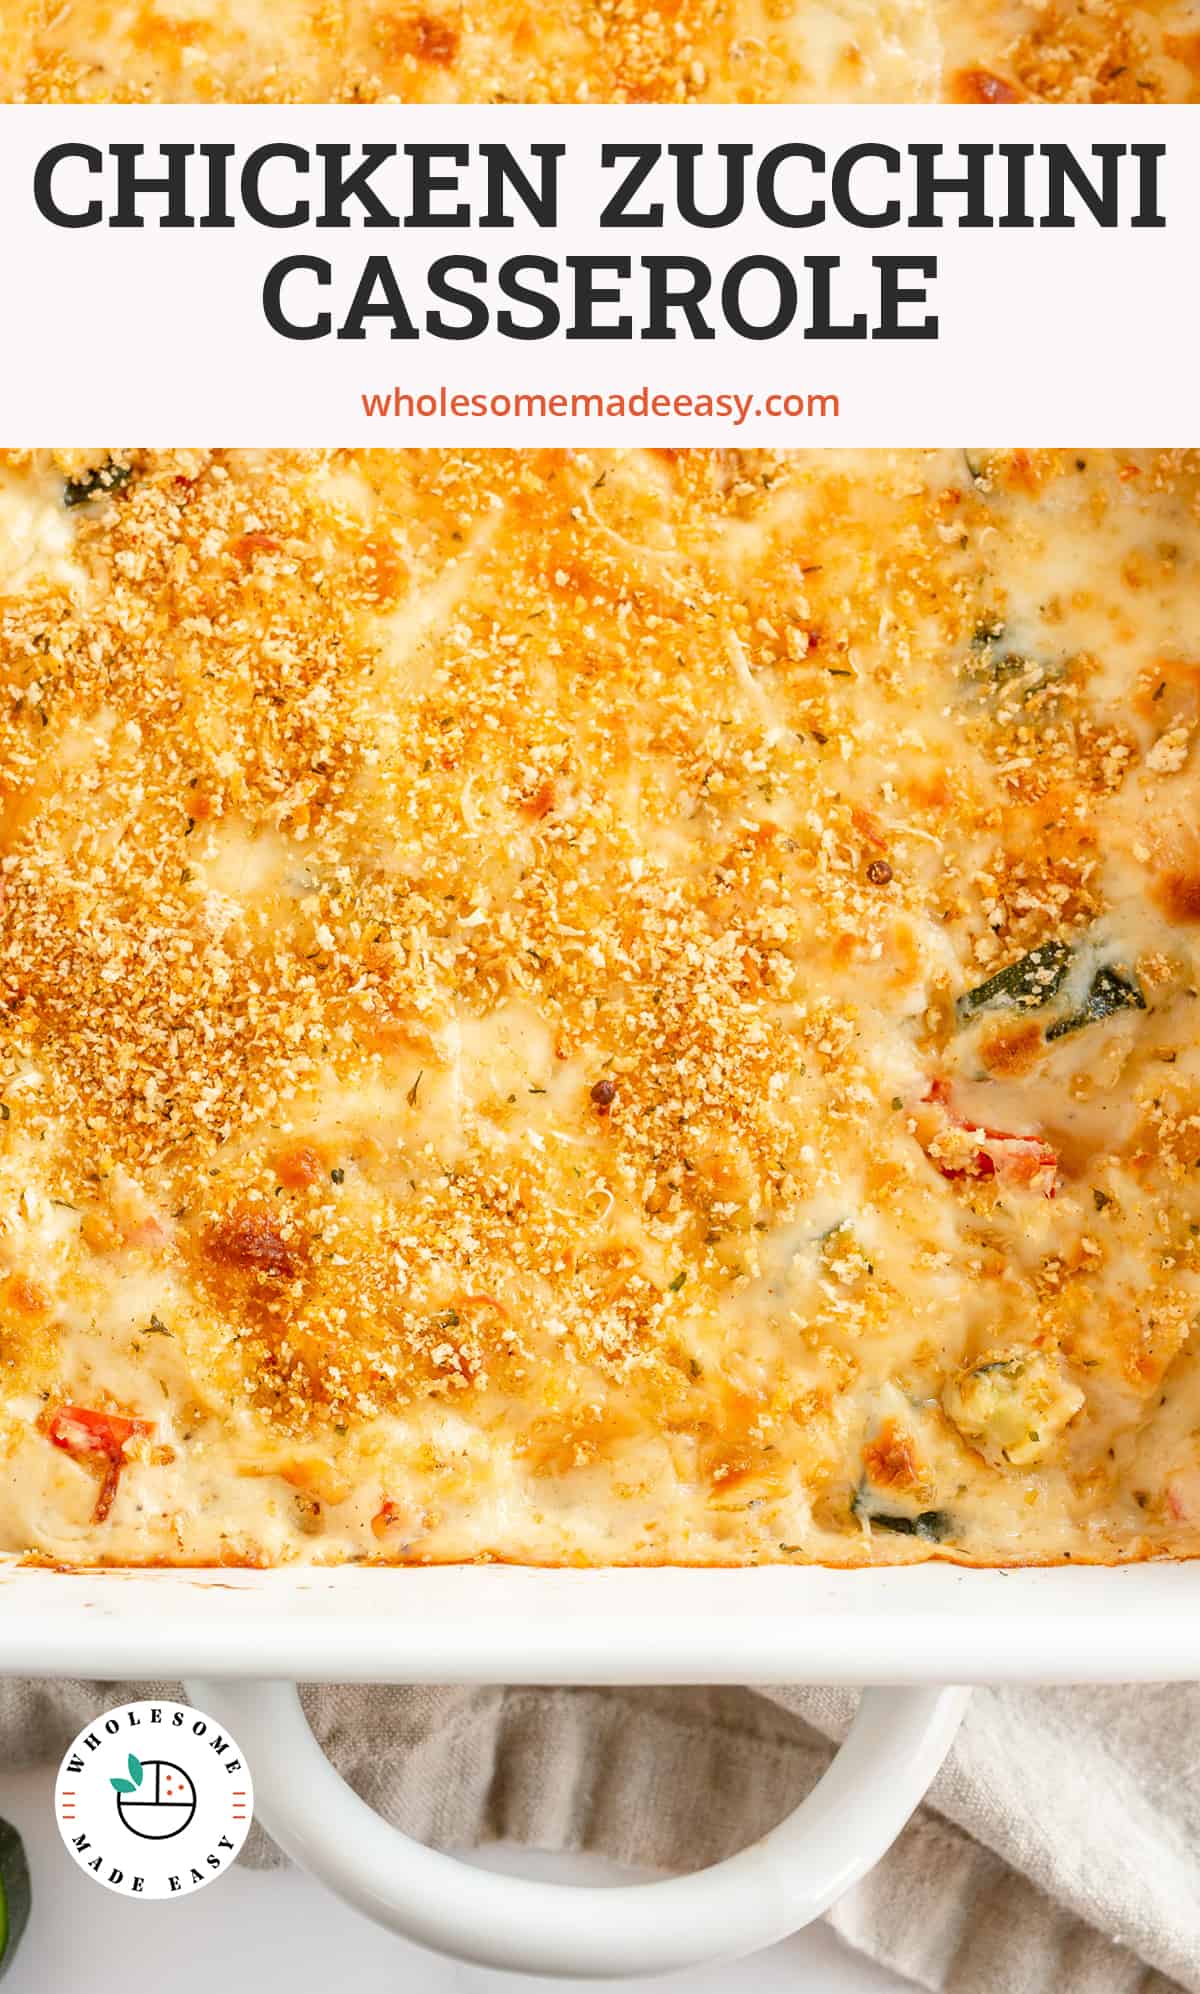 A closeup of Chicken Zucchini Casserole with overlay text.